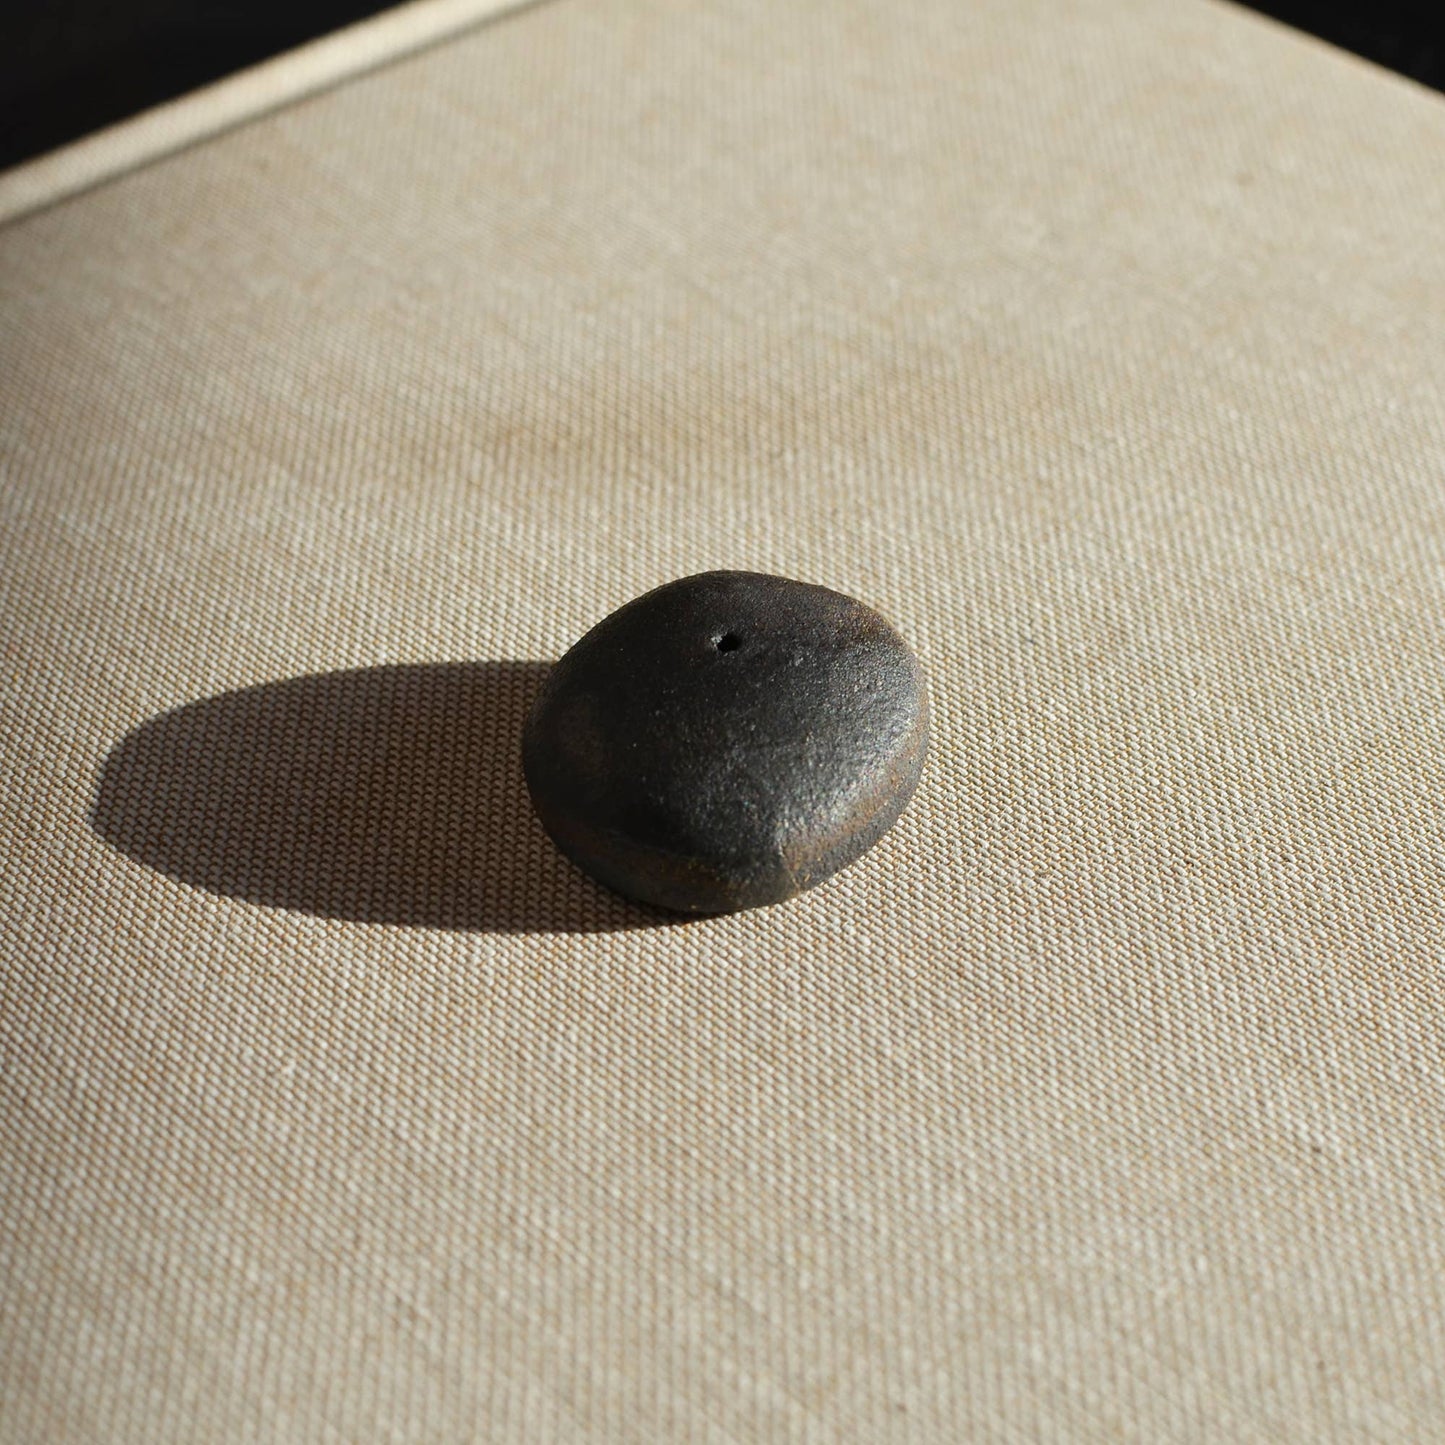 [Burning Ritual] Raw Black Clay Pebble Incense Holder - The Crowd Went Wild